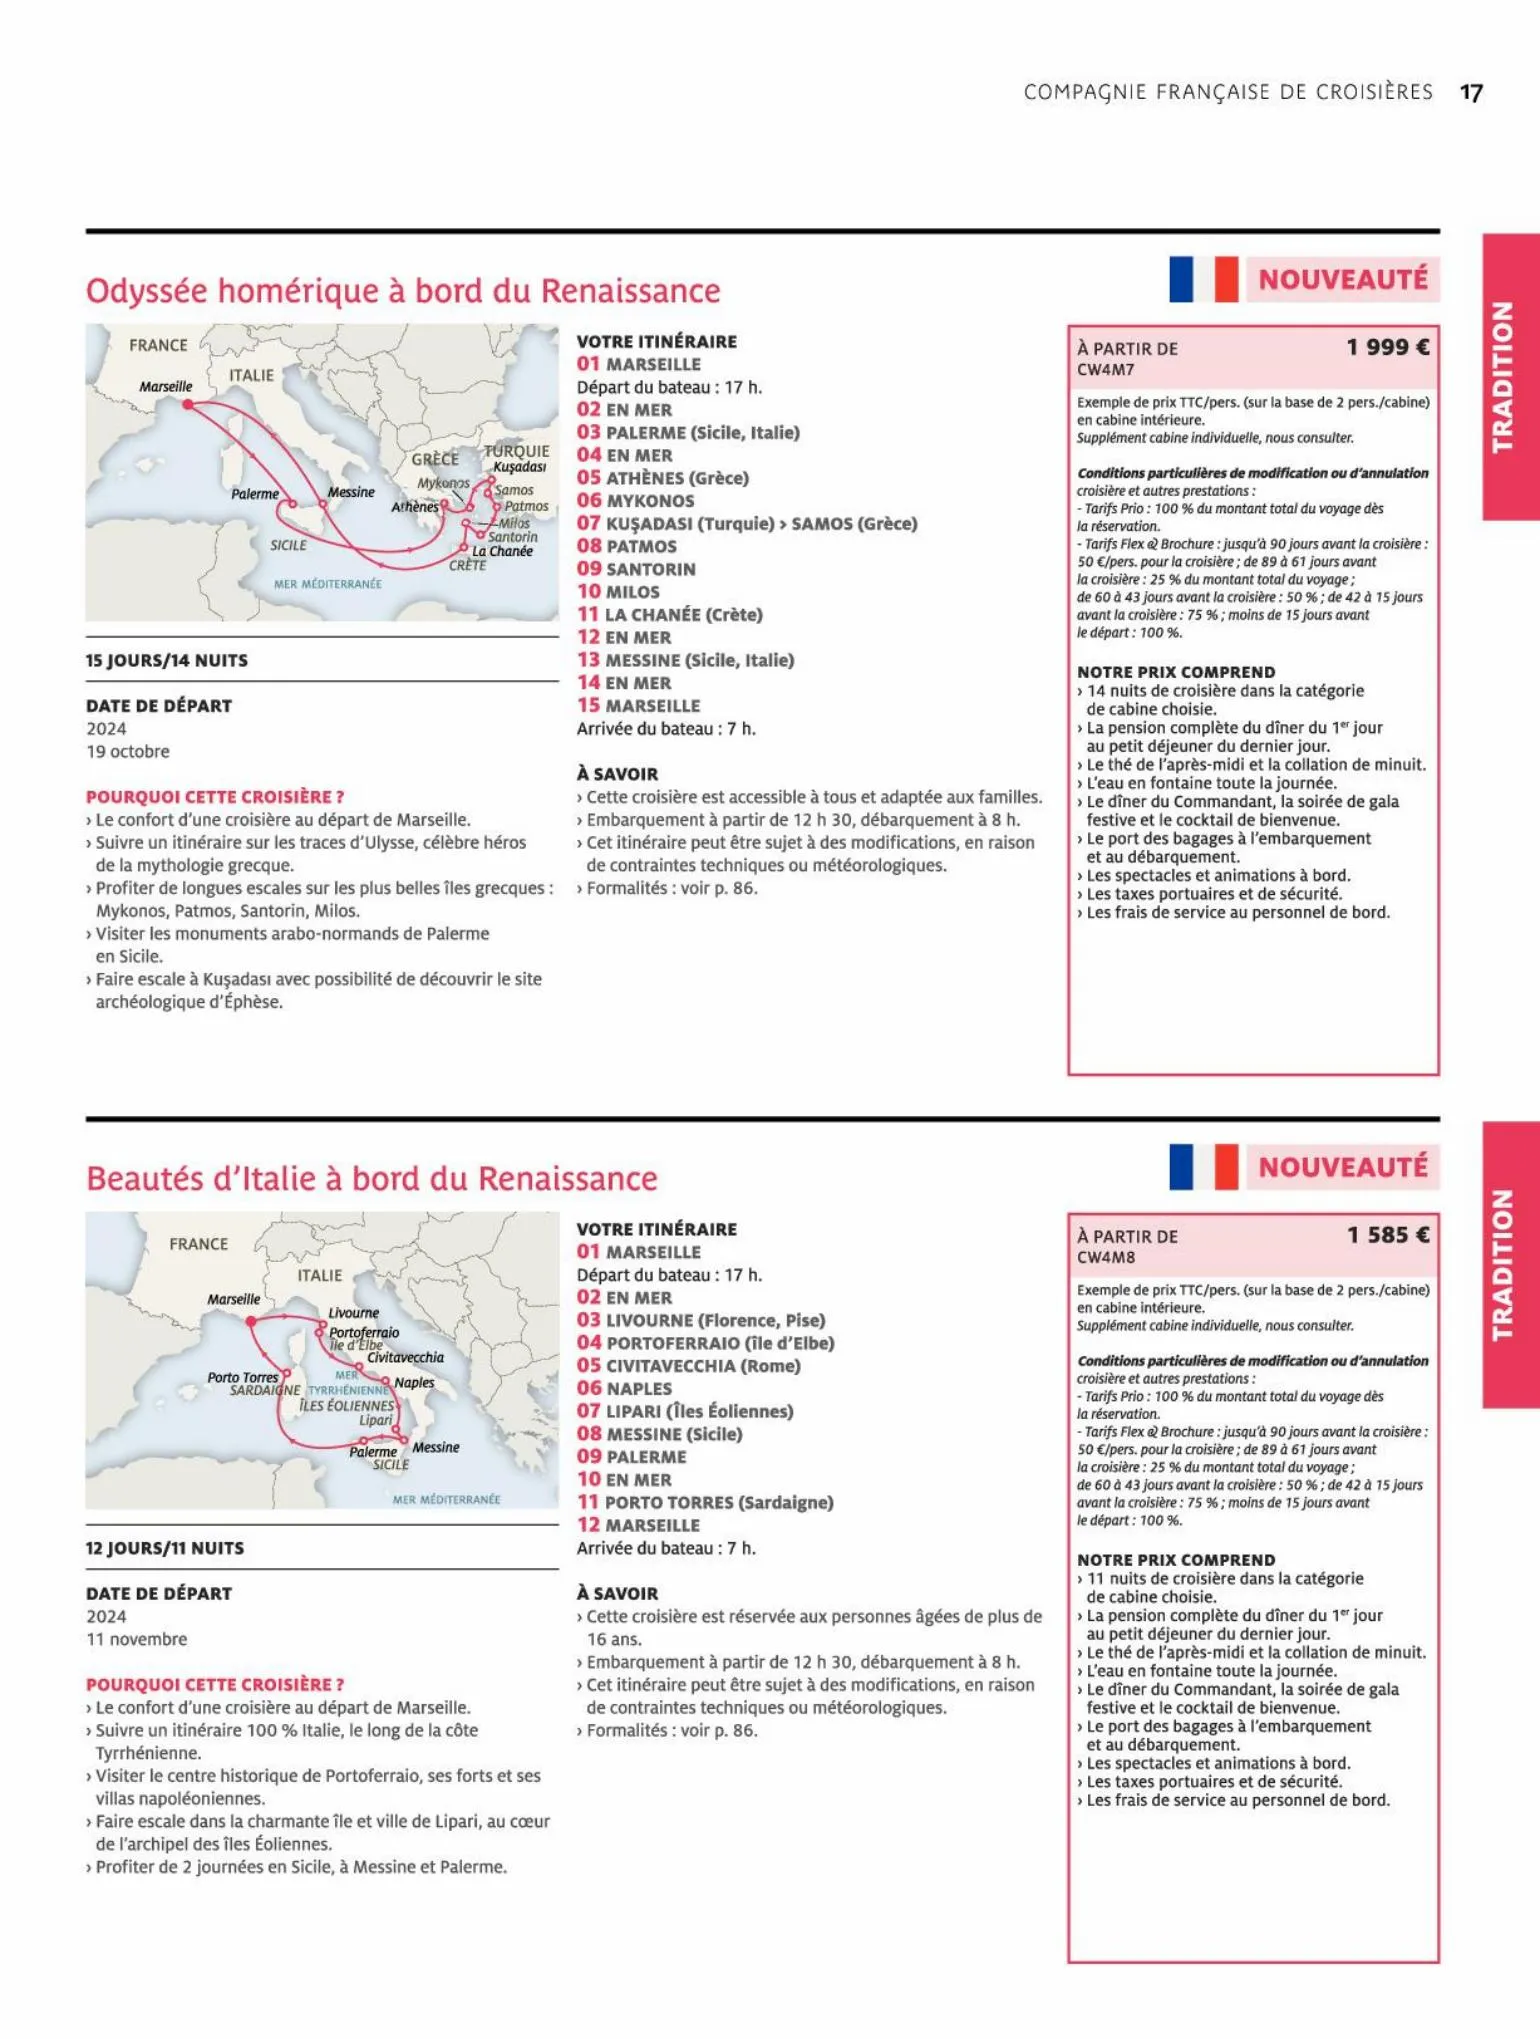 Catalogue Croisieres Kuoni 2024 2025, page 00019